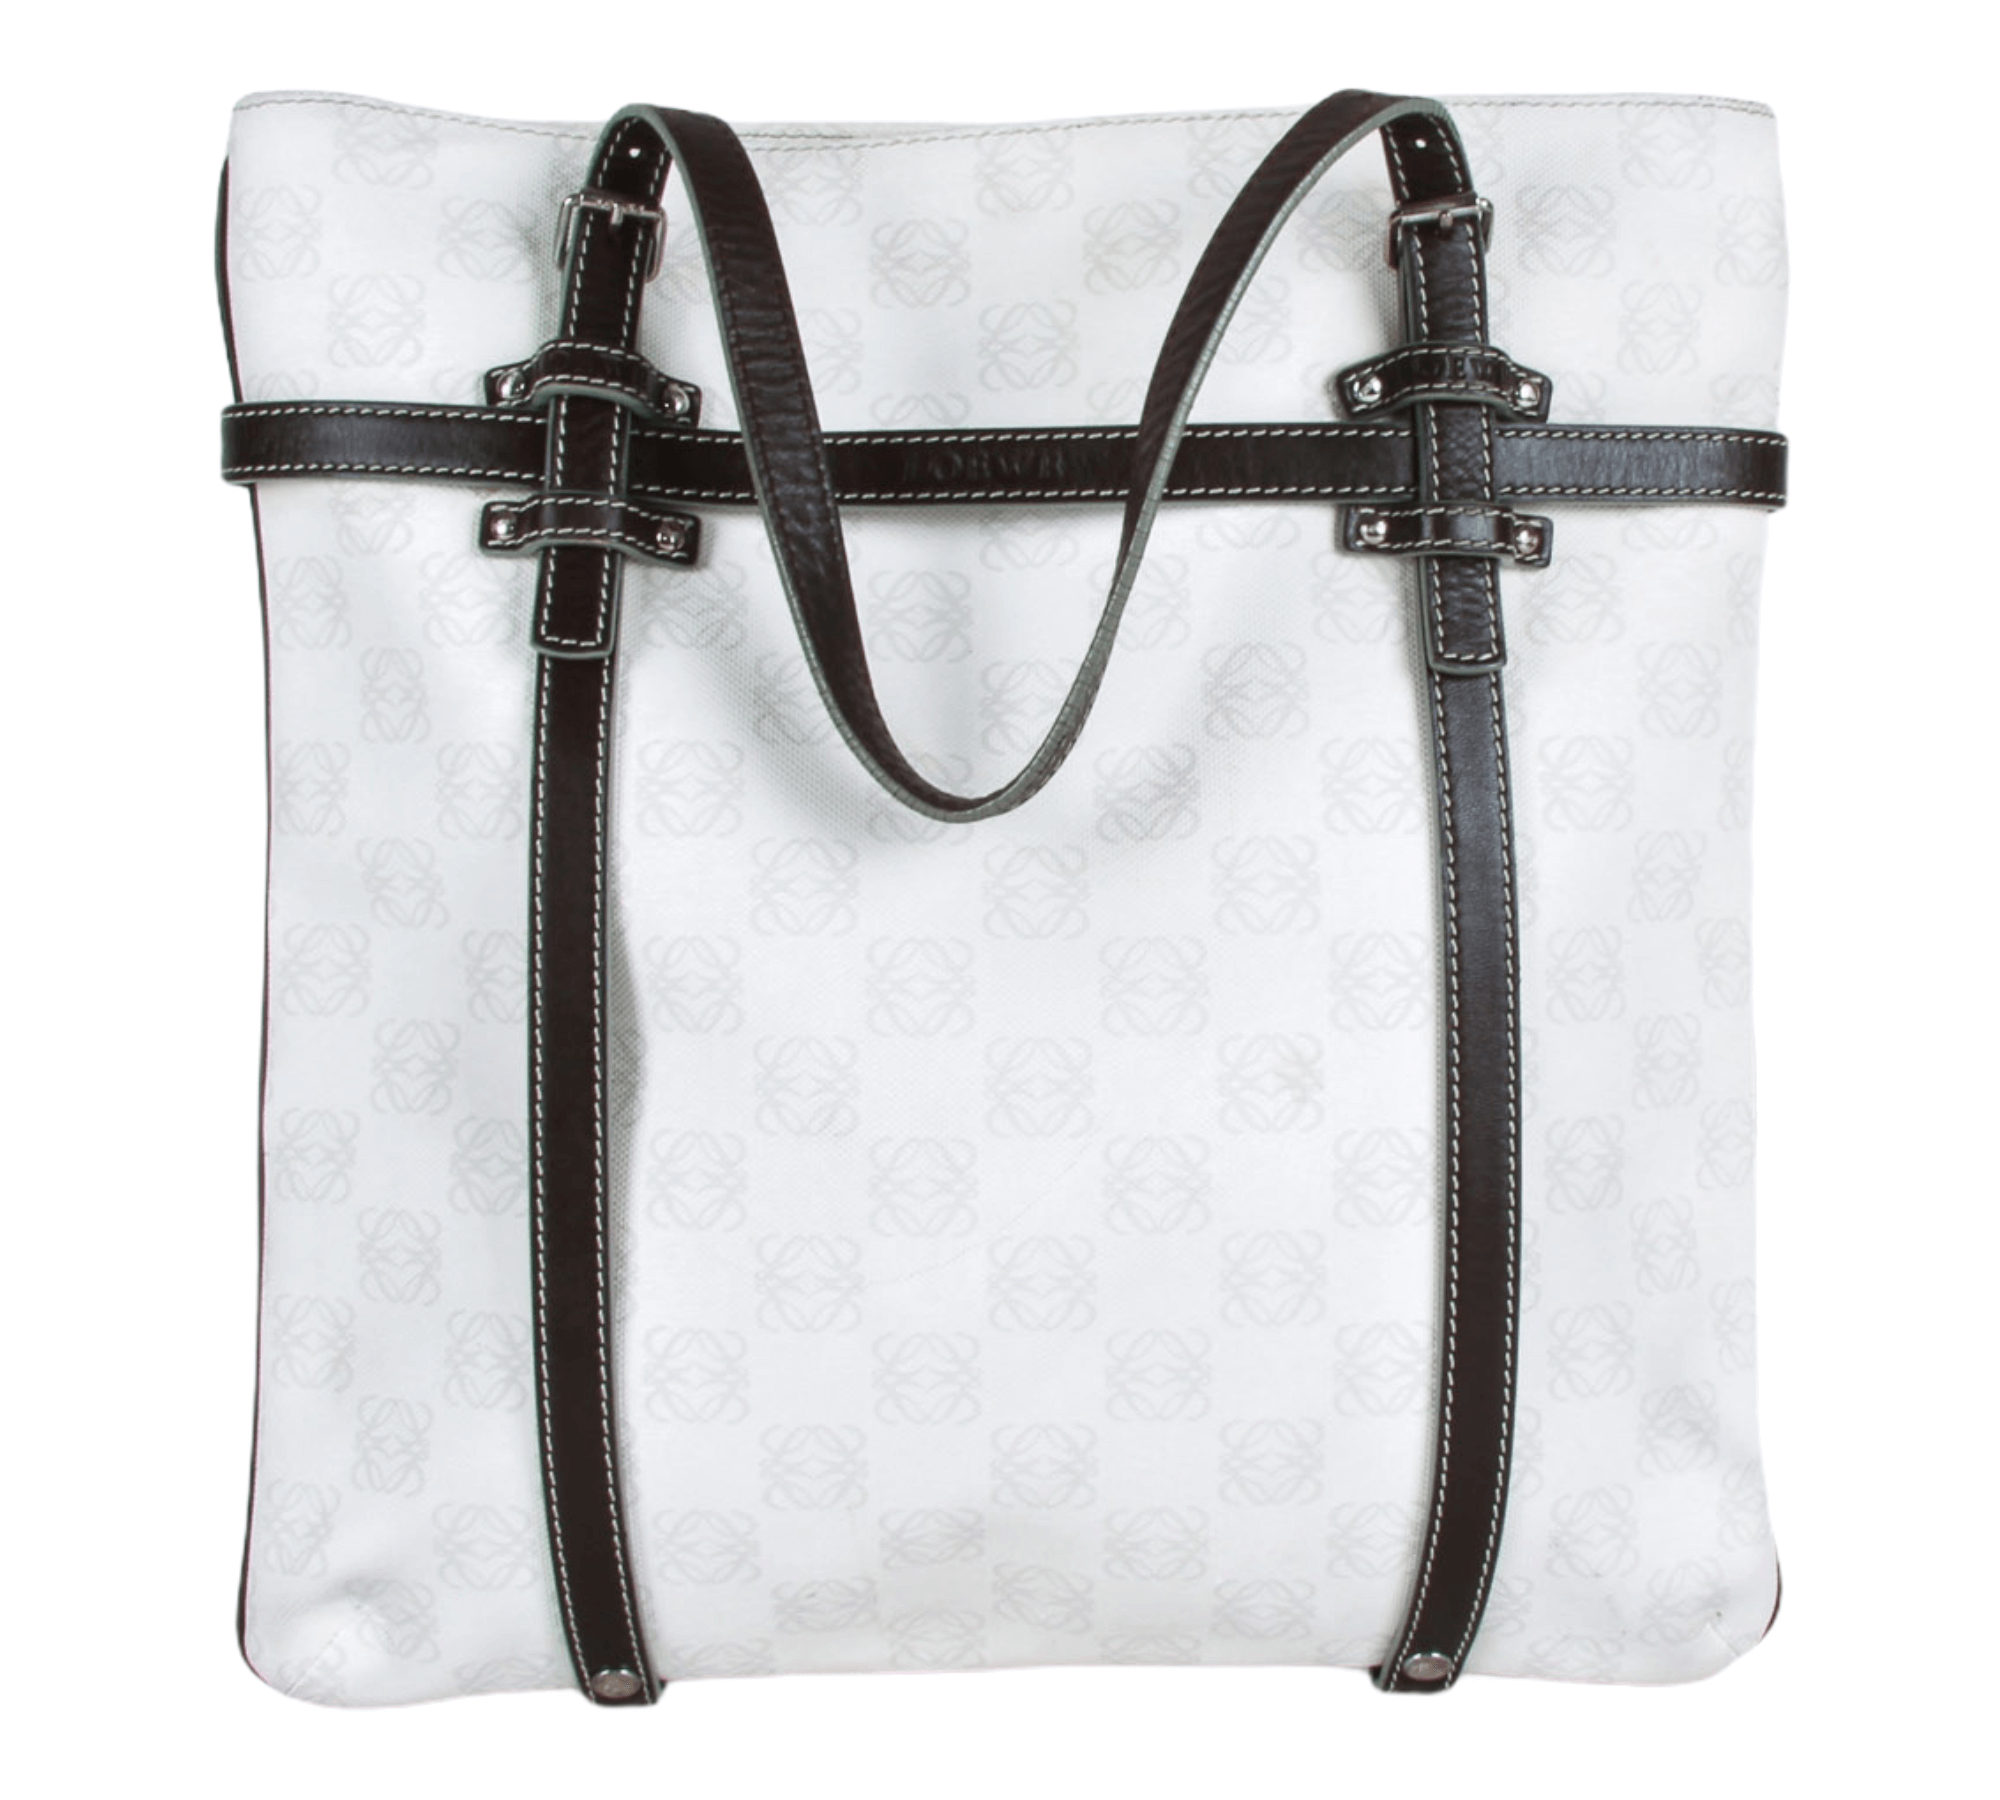 Luxury Leather Tote Bag | Off White